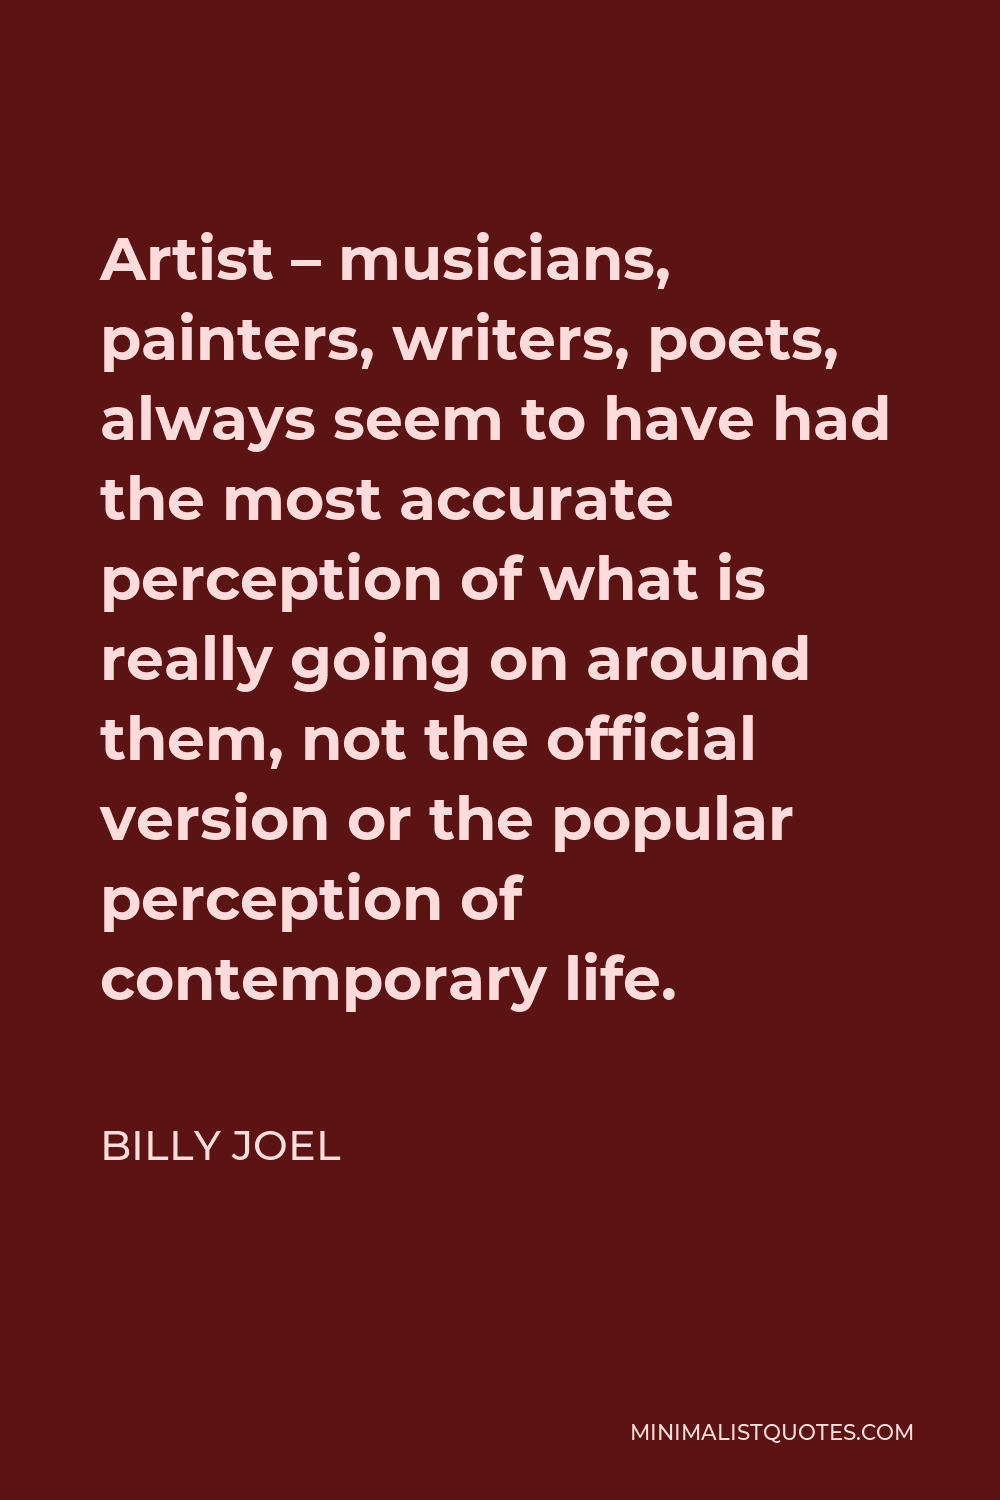 Billy Joel Quote - Artist – musicians, painters, writers, poets, always seem to have had the most accurate perception of what is really going on around them, not the official version or the popular perception of contemporary life.